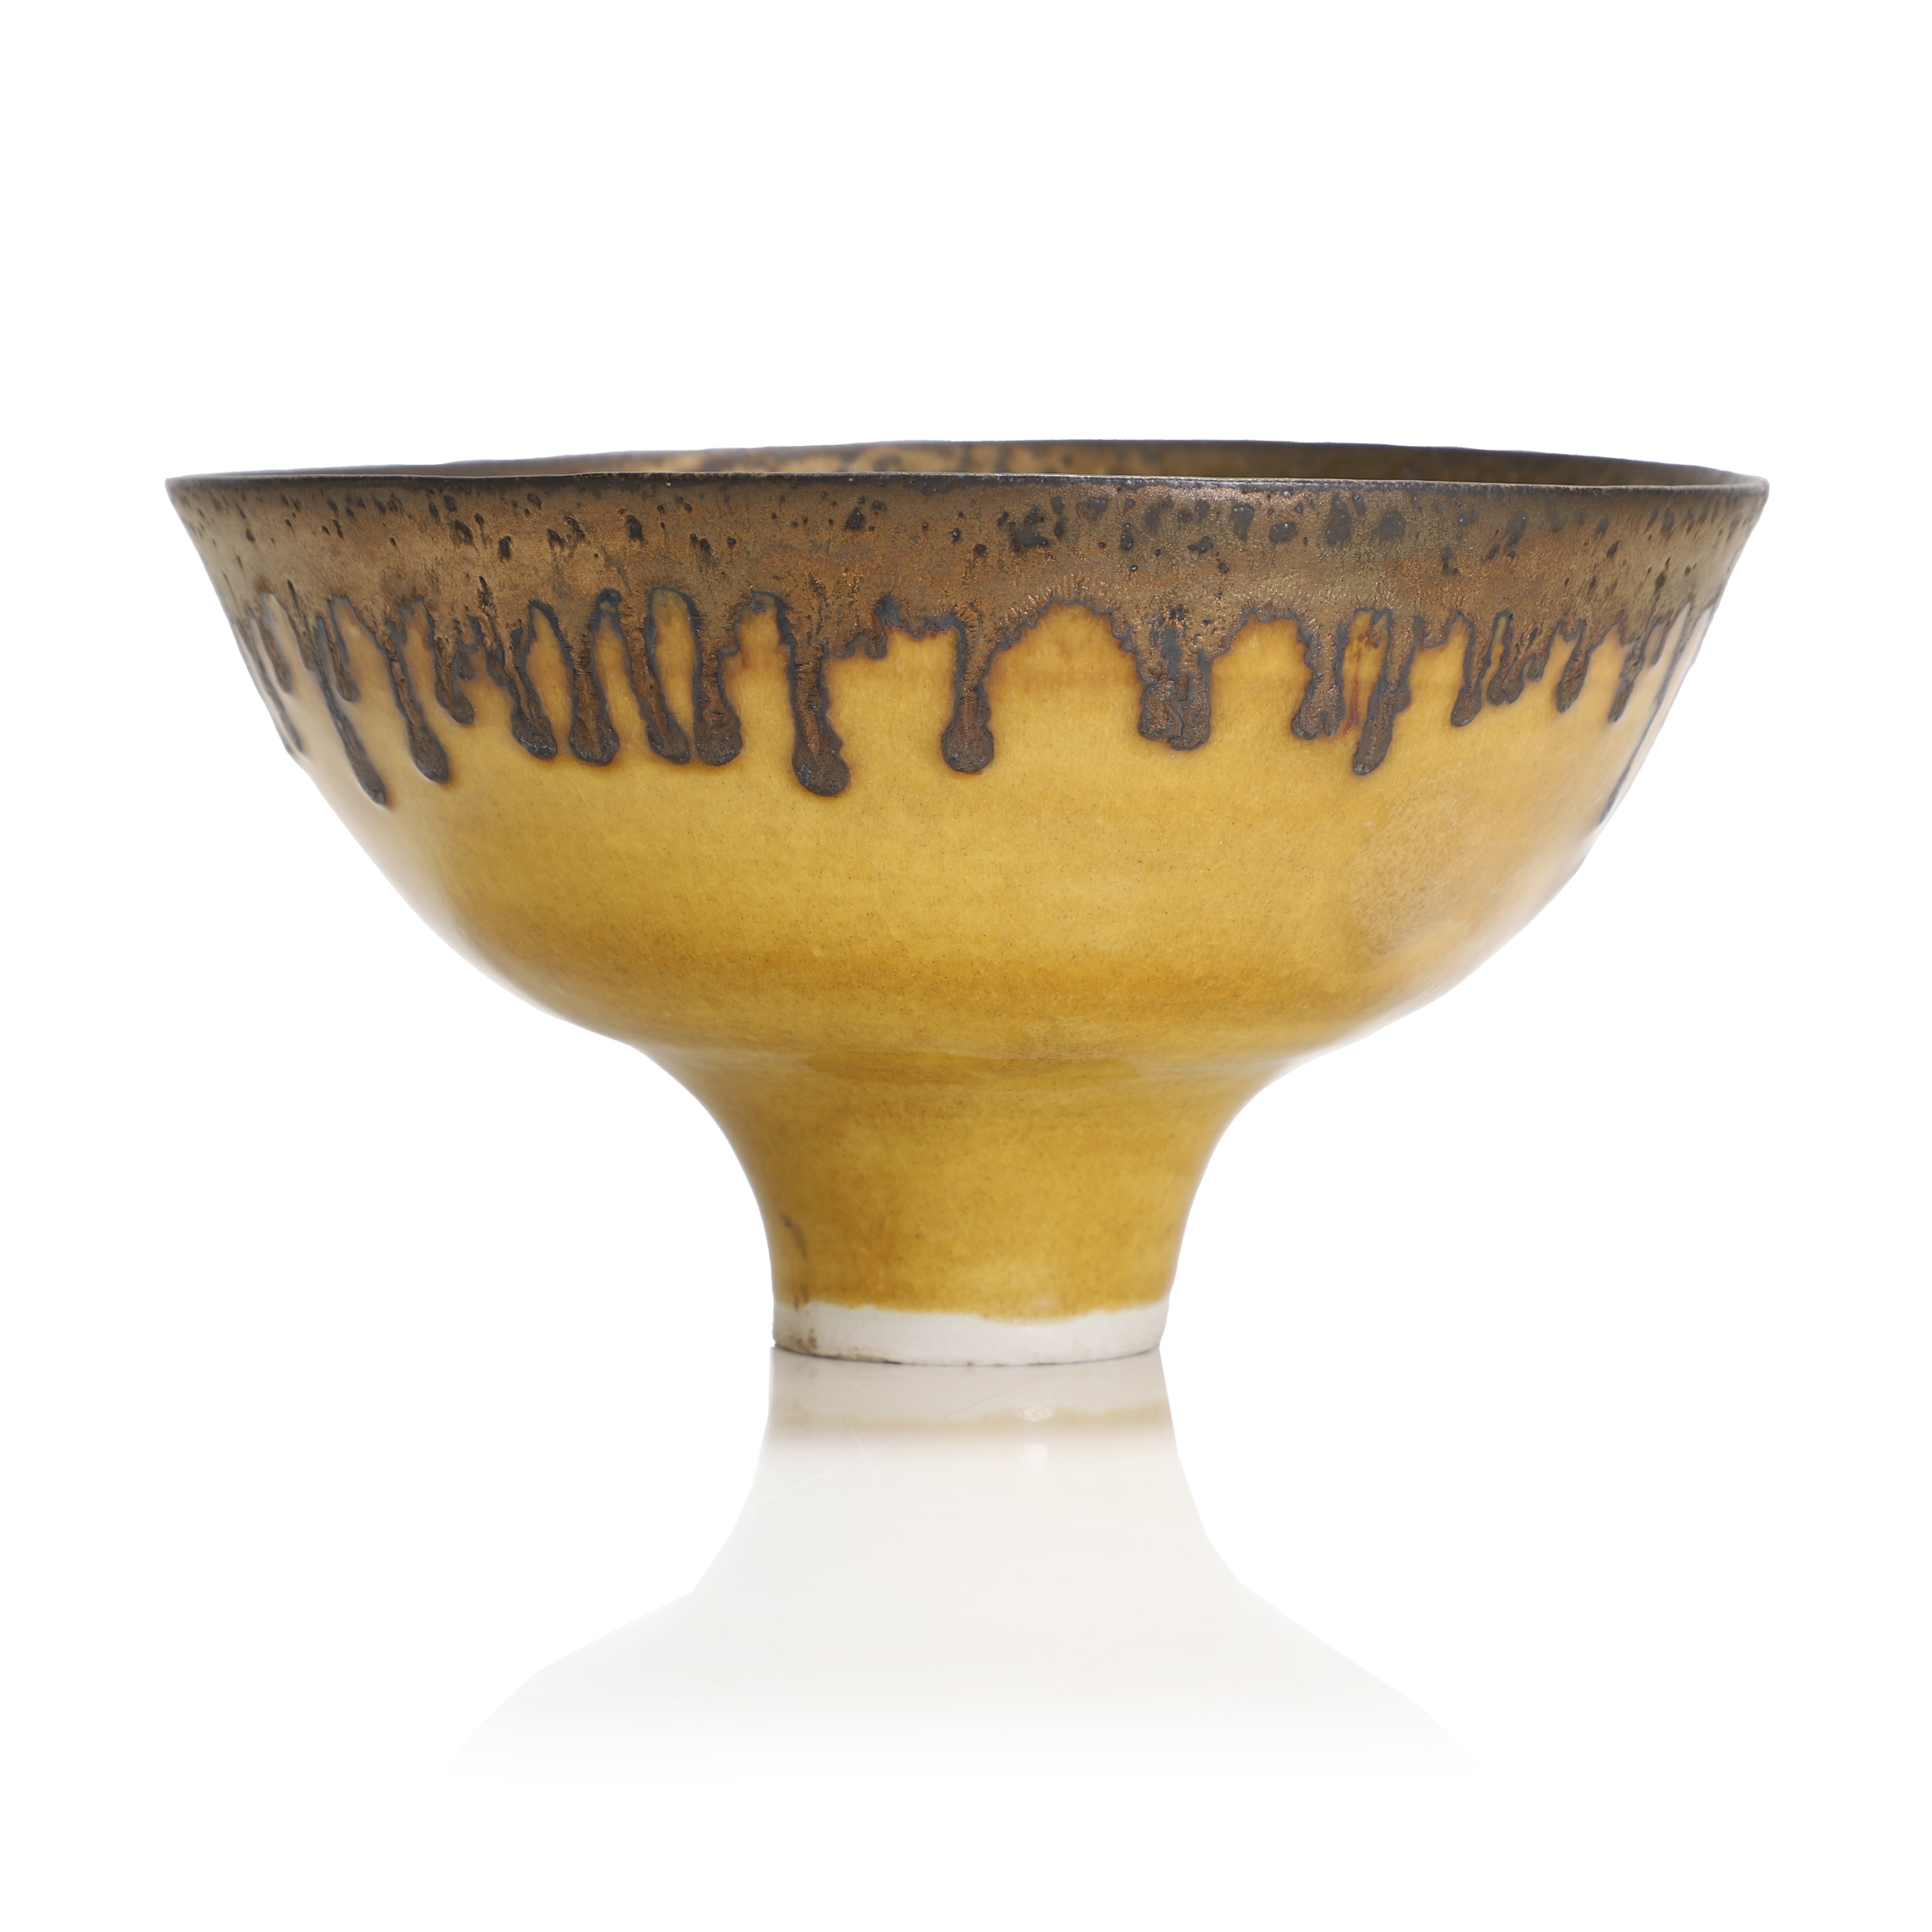  Dame Lucie Rie (Austrian, 1902-1995) a porcelain bowl, with a yellow glaze and manganese rim, impressed to the bottom of the foot with the artist's seal, 19cm diameter 10cm high (£8,000-12,000)